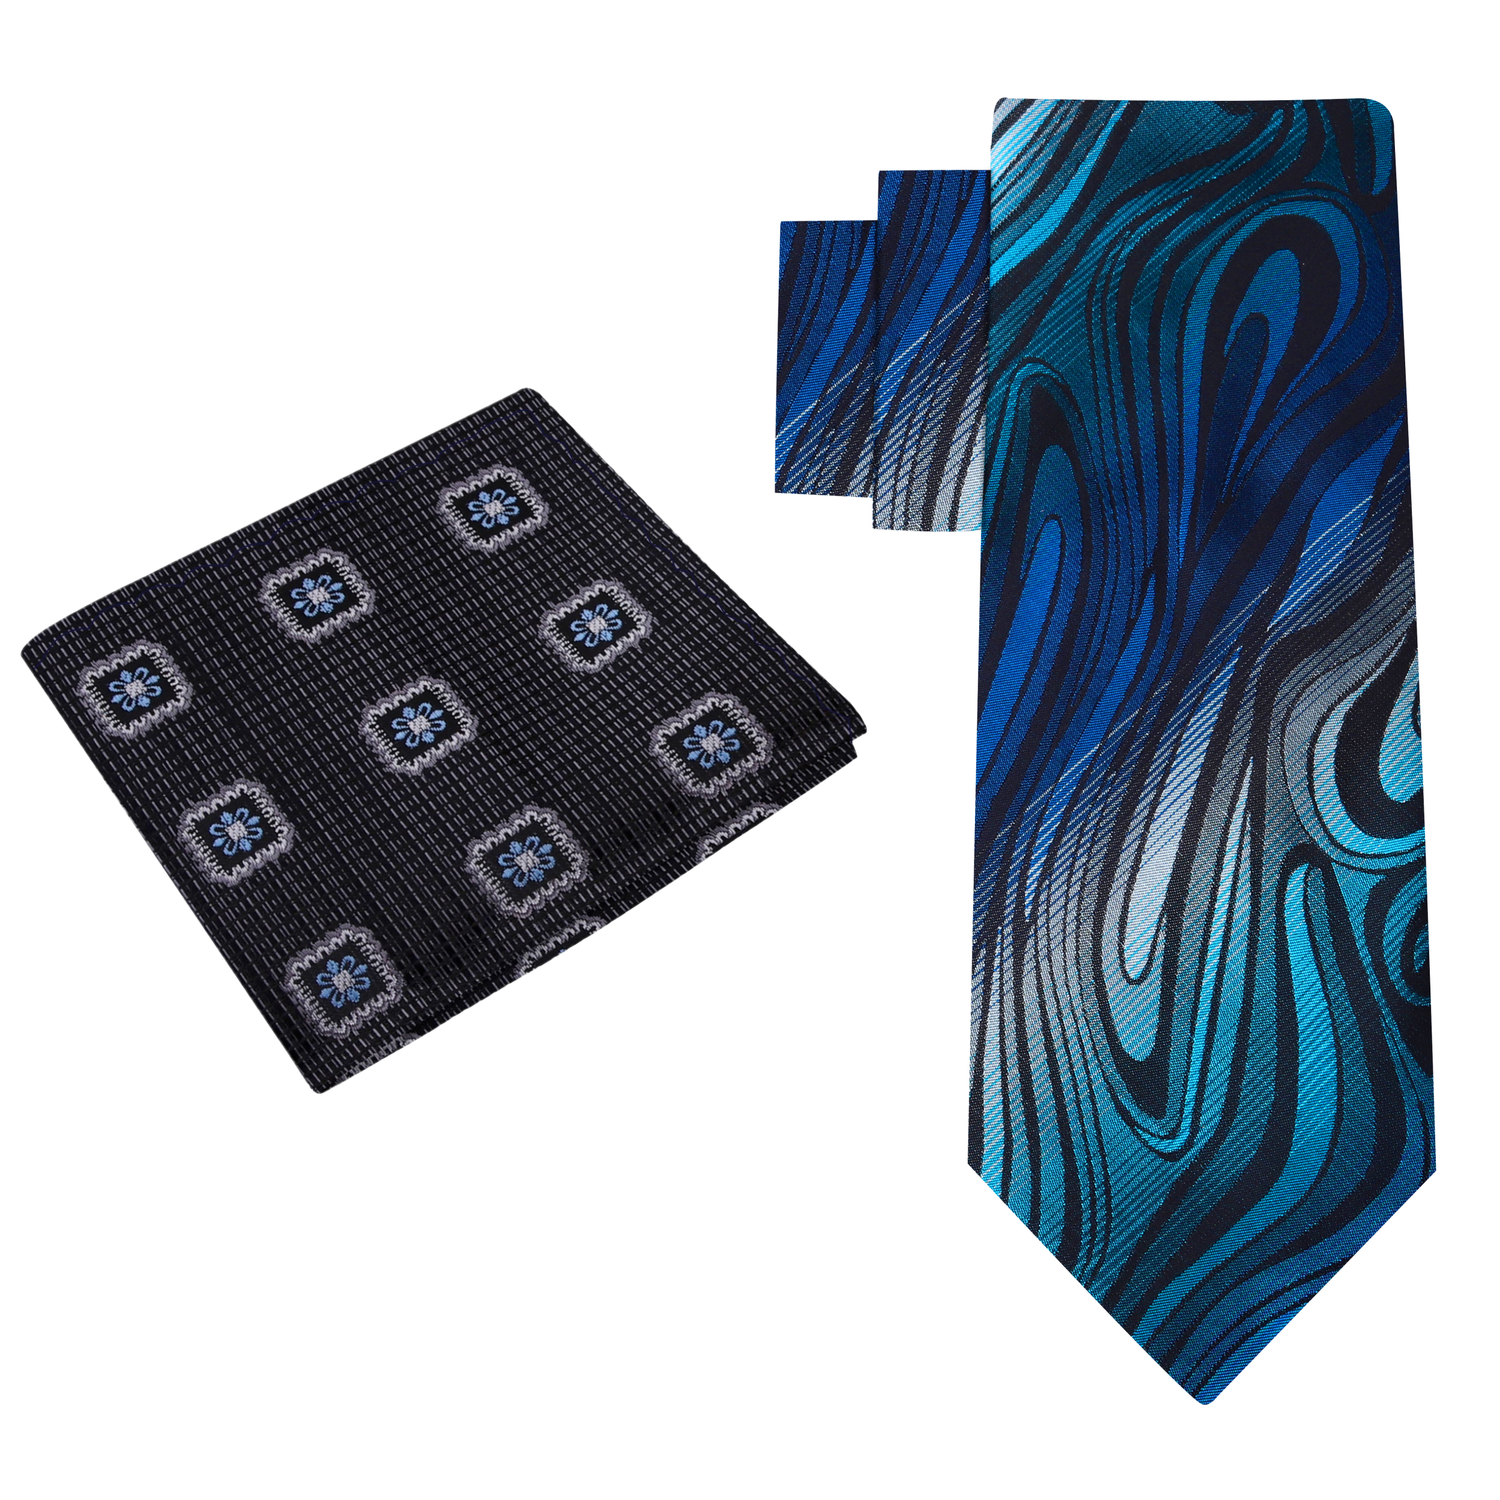 View 2: Shades of Blue and Grey Abstract Fire Necktie and Charcoal with Blue Medallion Square